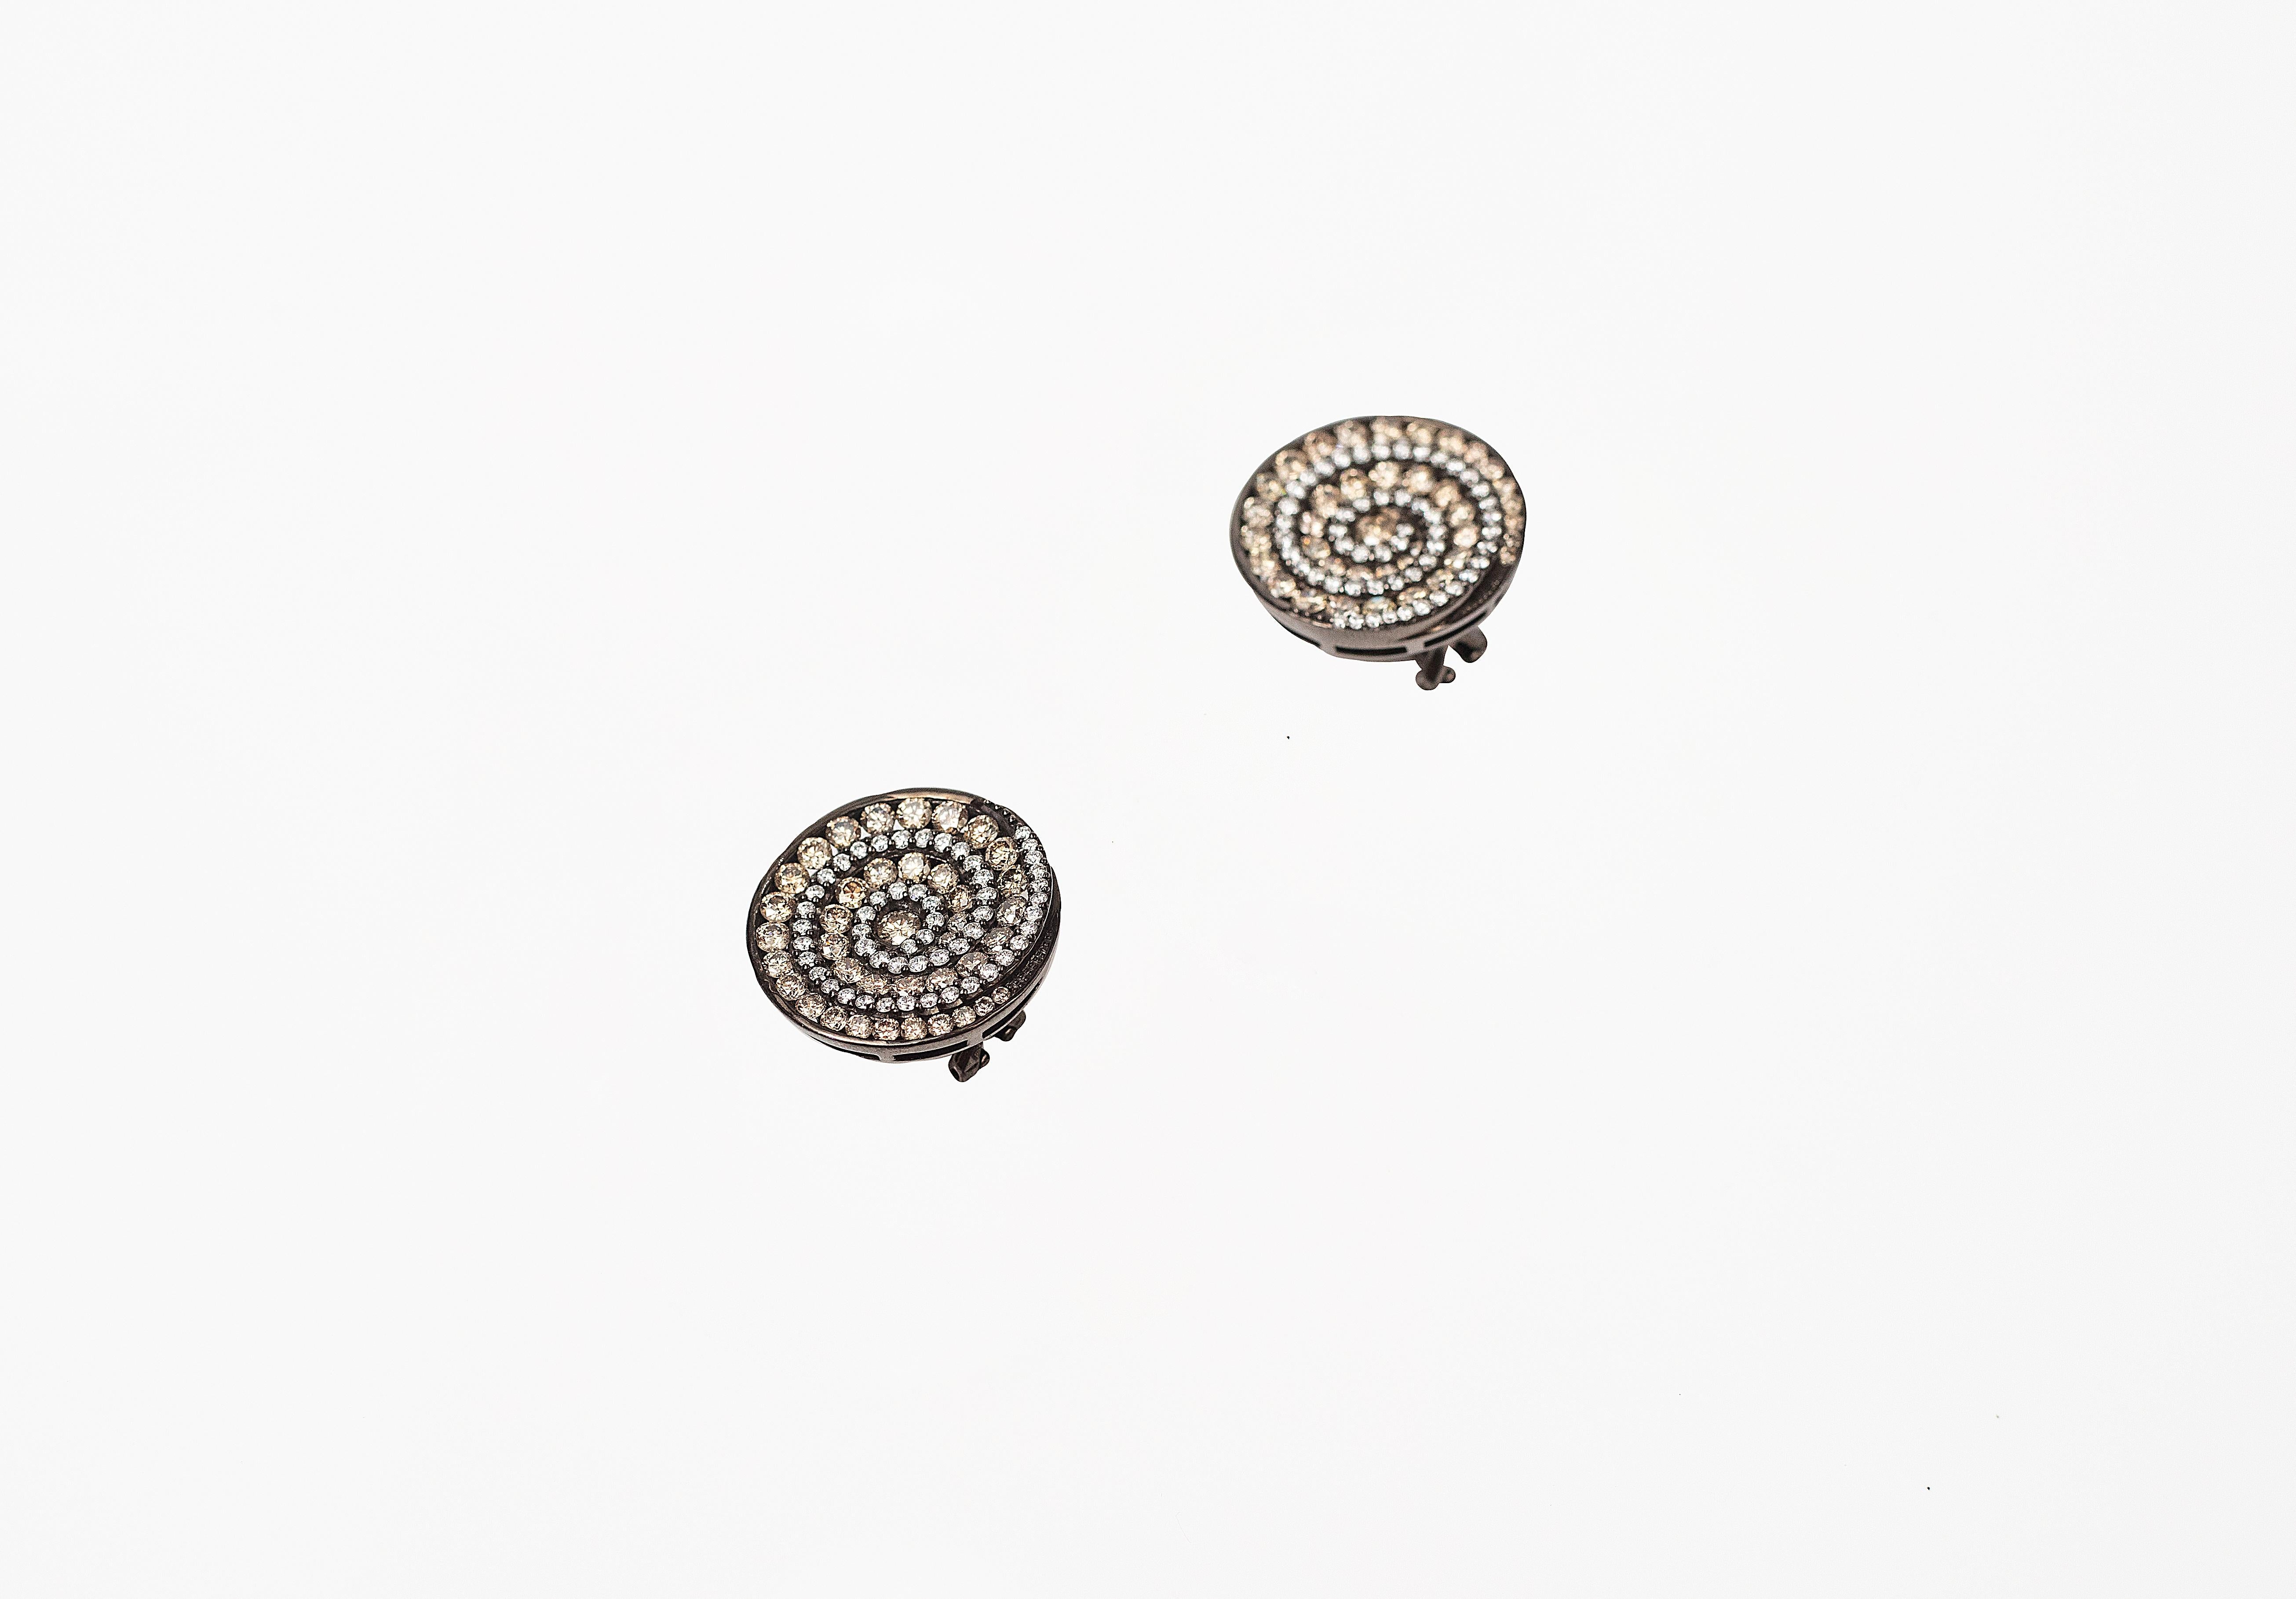 High Fashion Handcrafted Stud Earrings in 18K Gold Black Rhodium.
Gold Weight - 15.964
Diamond Weight - 4.48
Diamond Clarity - VS
Colour - G and Brown
Post and Clip System
